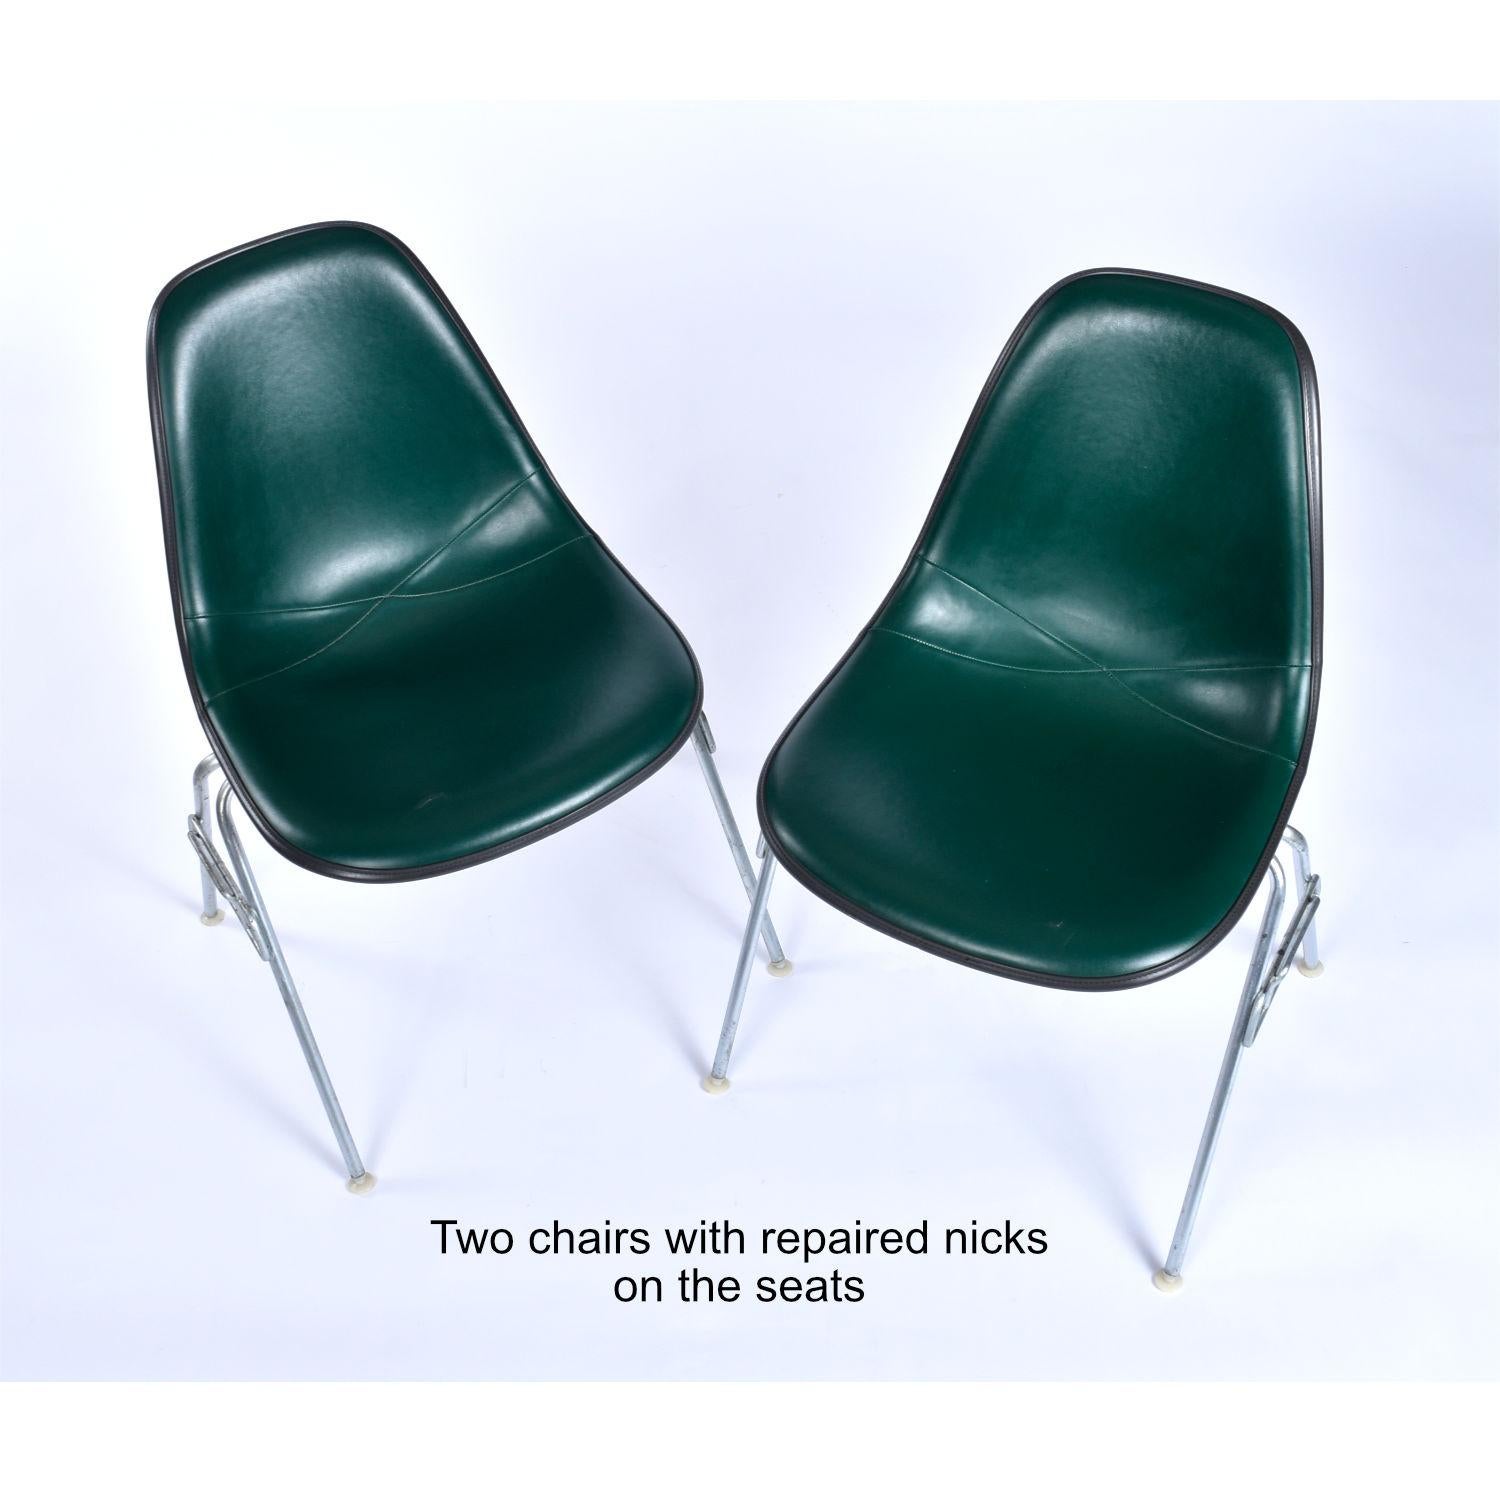 Late 20th Century Eames for Herman Miller Stacking DSS Fiberglass Shell Chairs with Green Pads